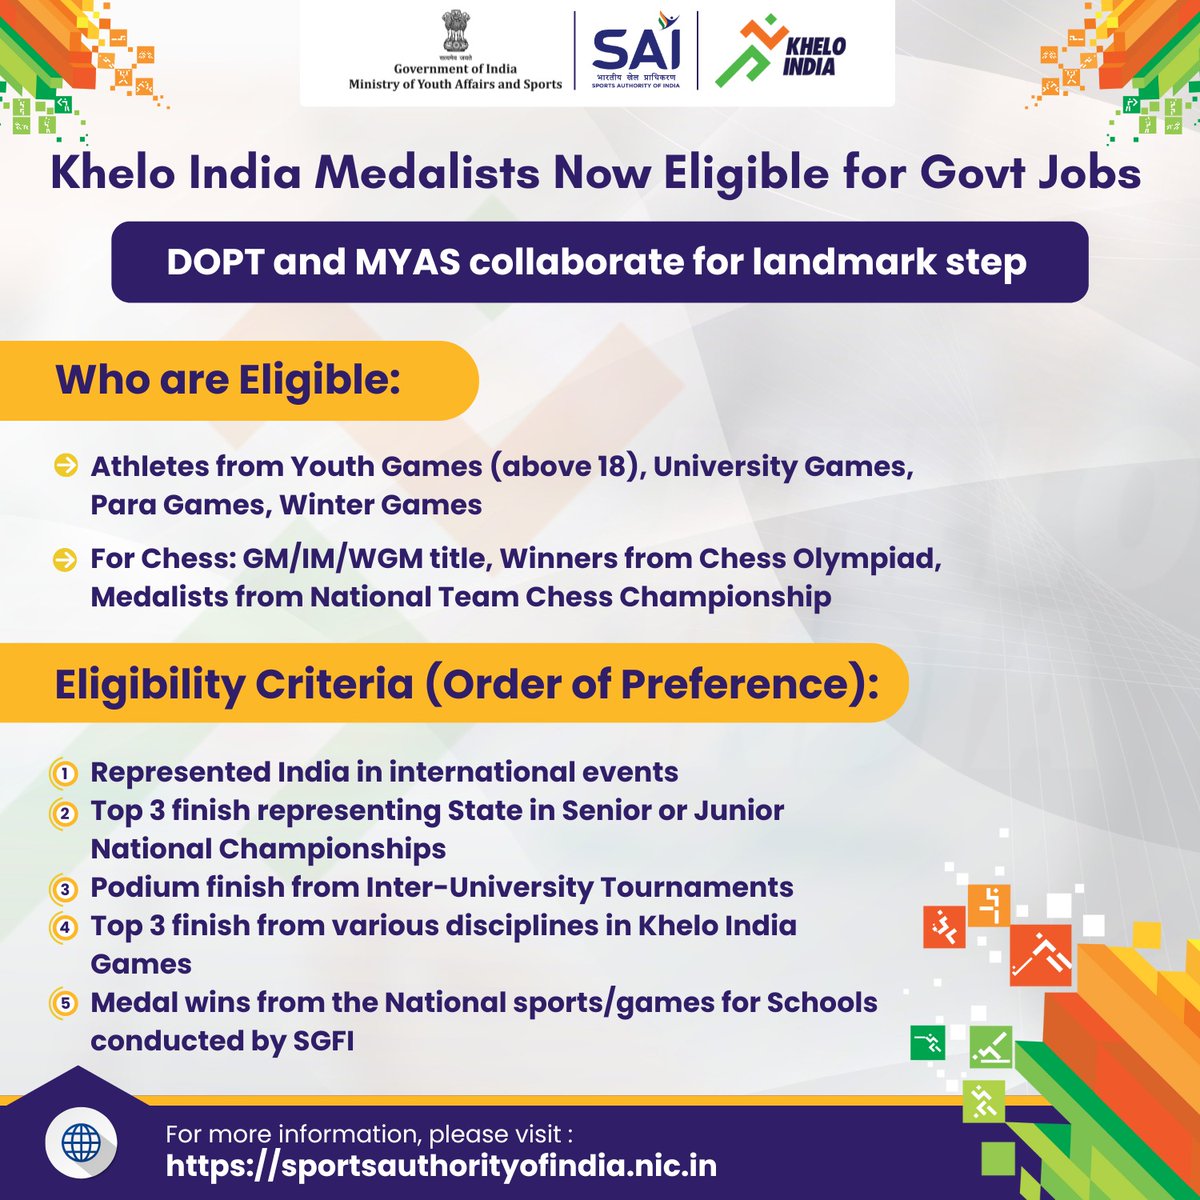 Exciting News Alert 🚨📣 Government of India's Dept of Personnel & Training and MYAS have made significant revisions to the eligibility criteria for sportspersons seeking Govt jobs. 🇮🇳